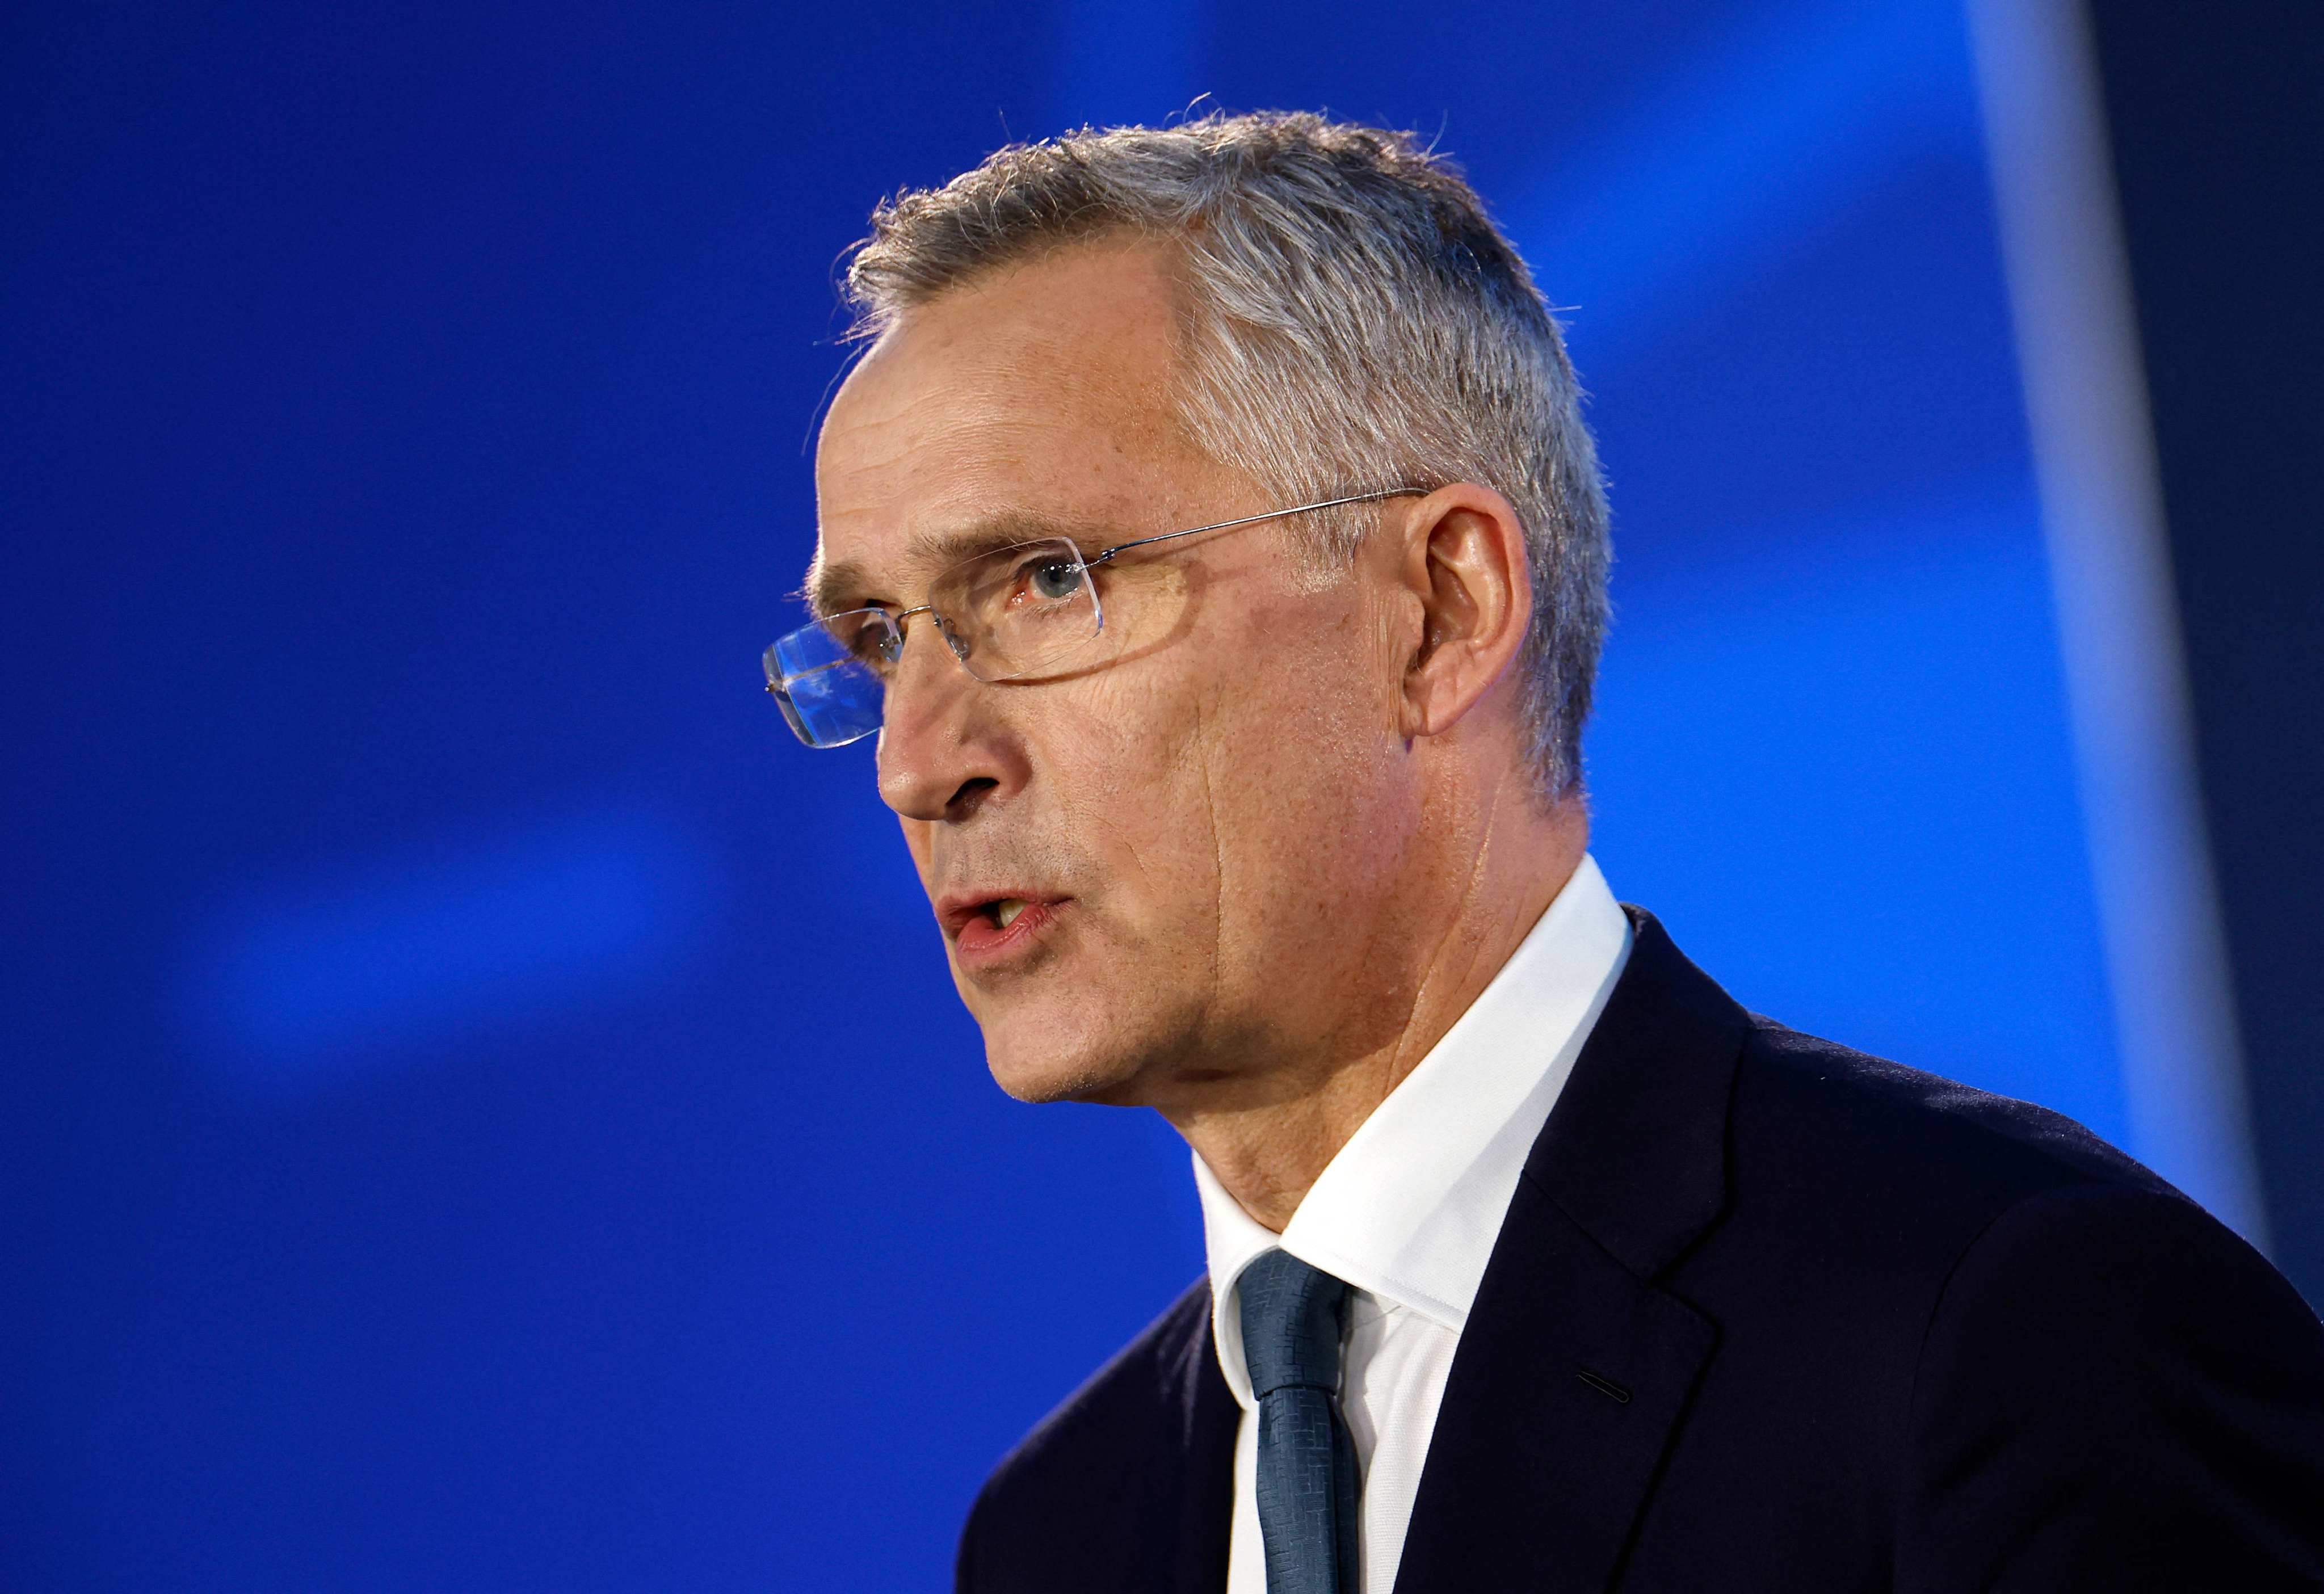 Nato Secretary General Jens Stoltenberg addresses media at the  transatlantic security alliance’s conference in Washington on Wednesday. Photo: Getty Images via AFP